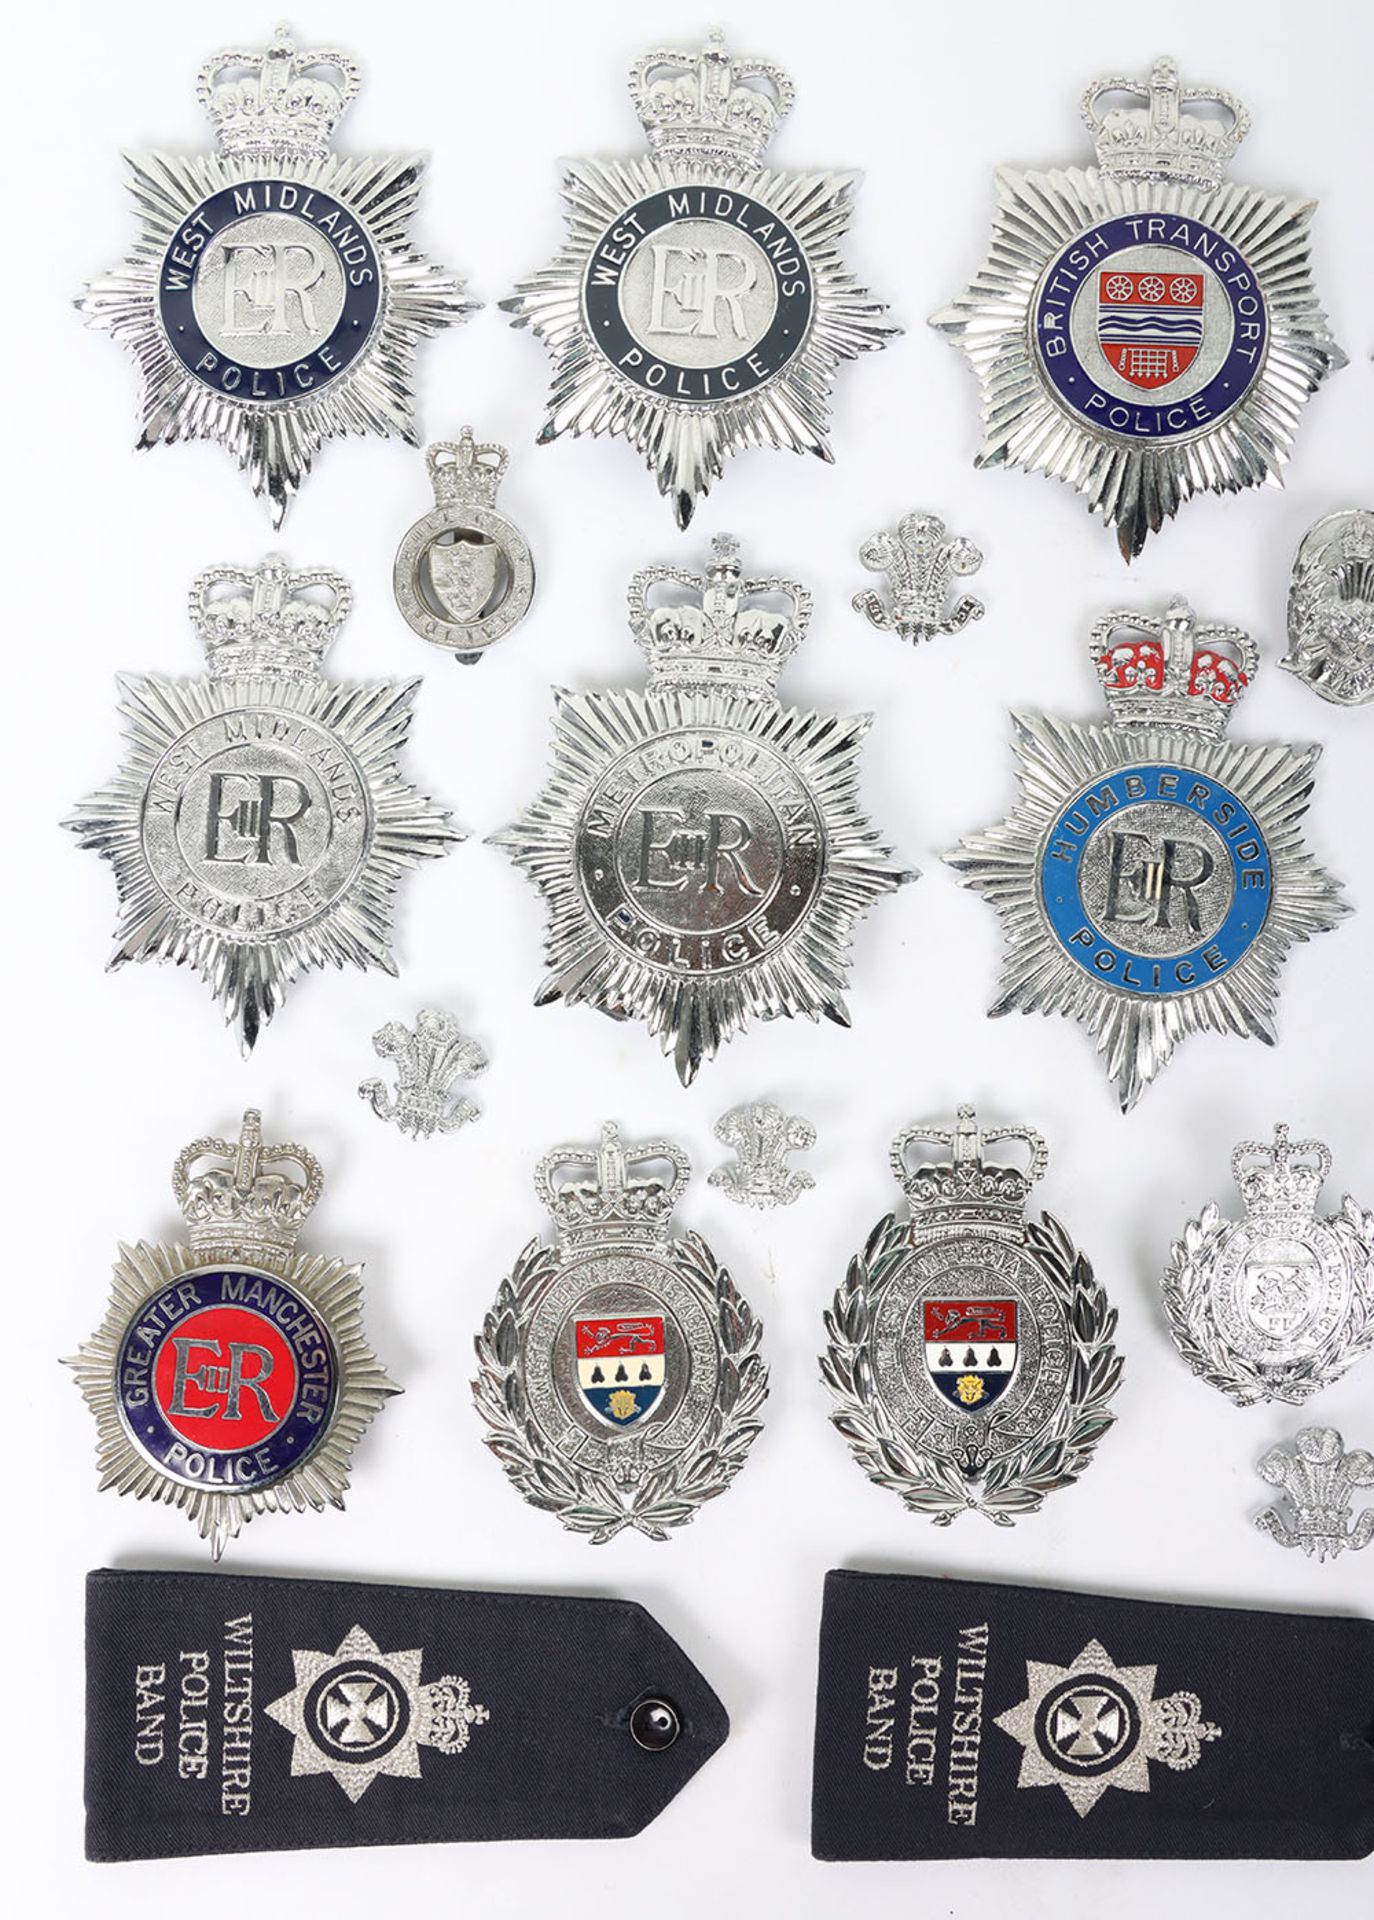 Police / Constabulary Badges - Image 2 of 5